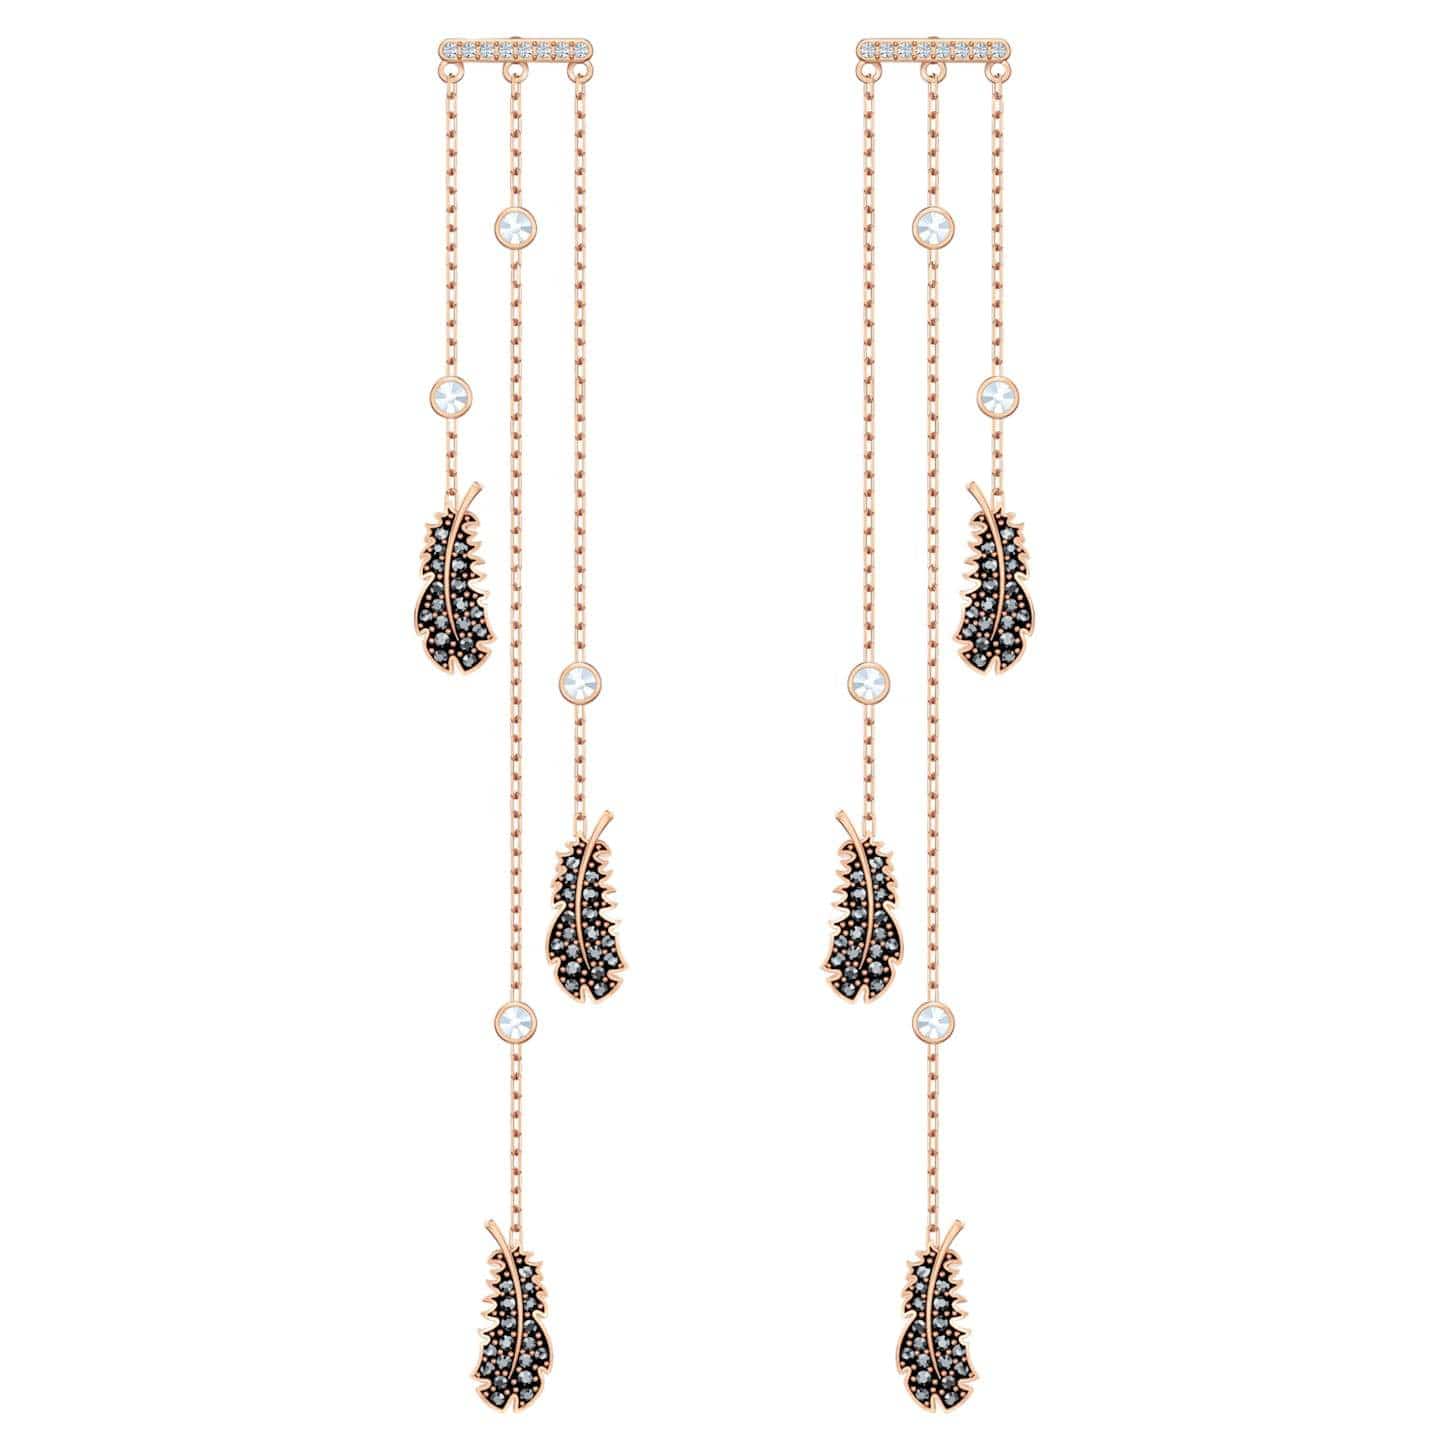 Naughty Chandelier pierced earrings, Black, Rose-gold tone plated - Brilliant Co